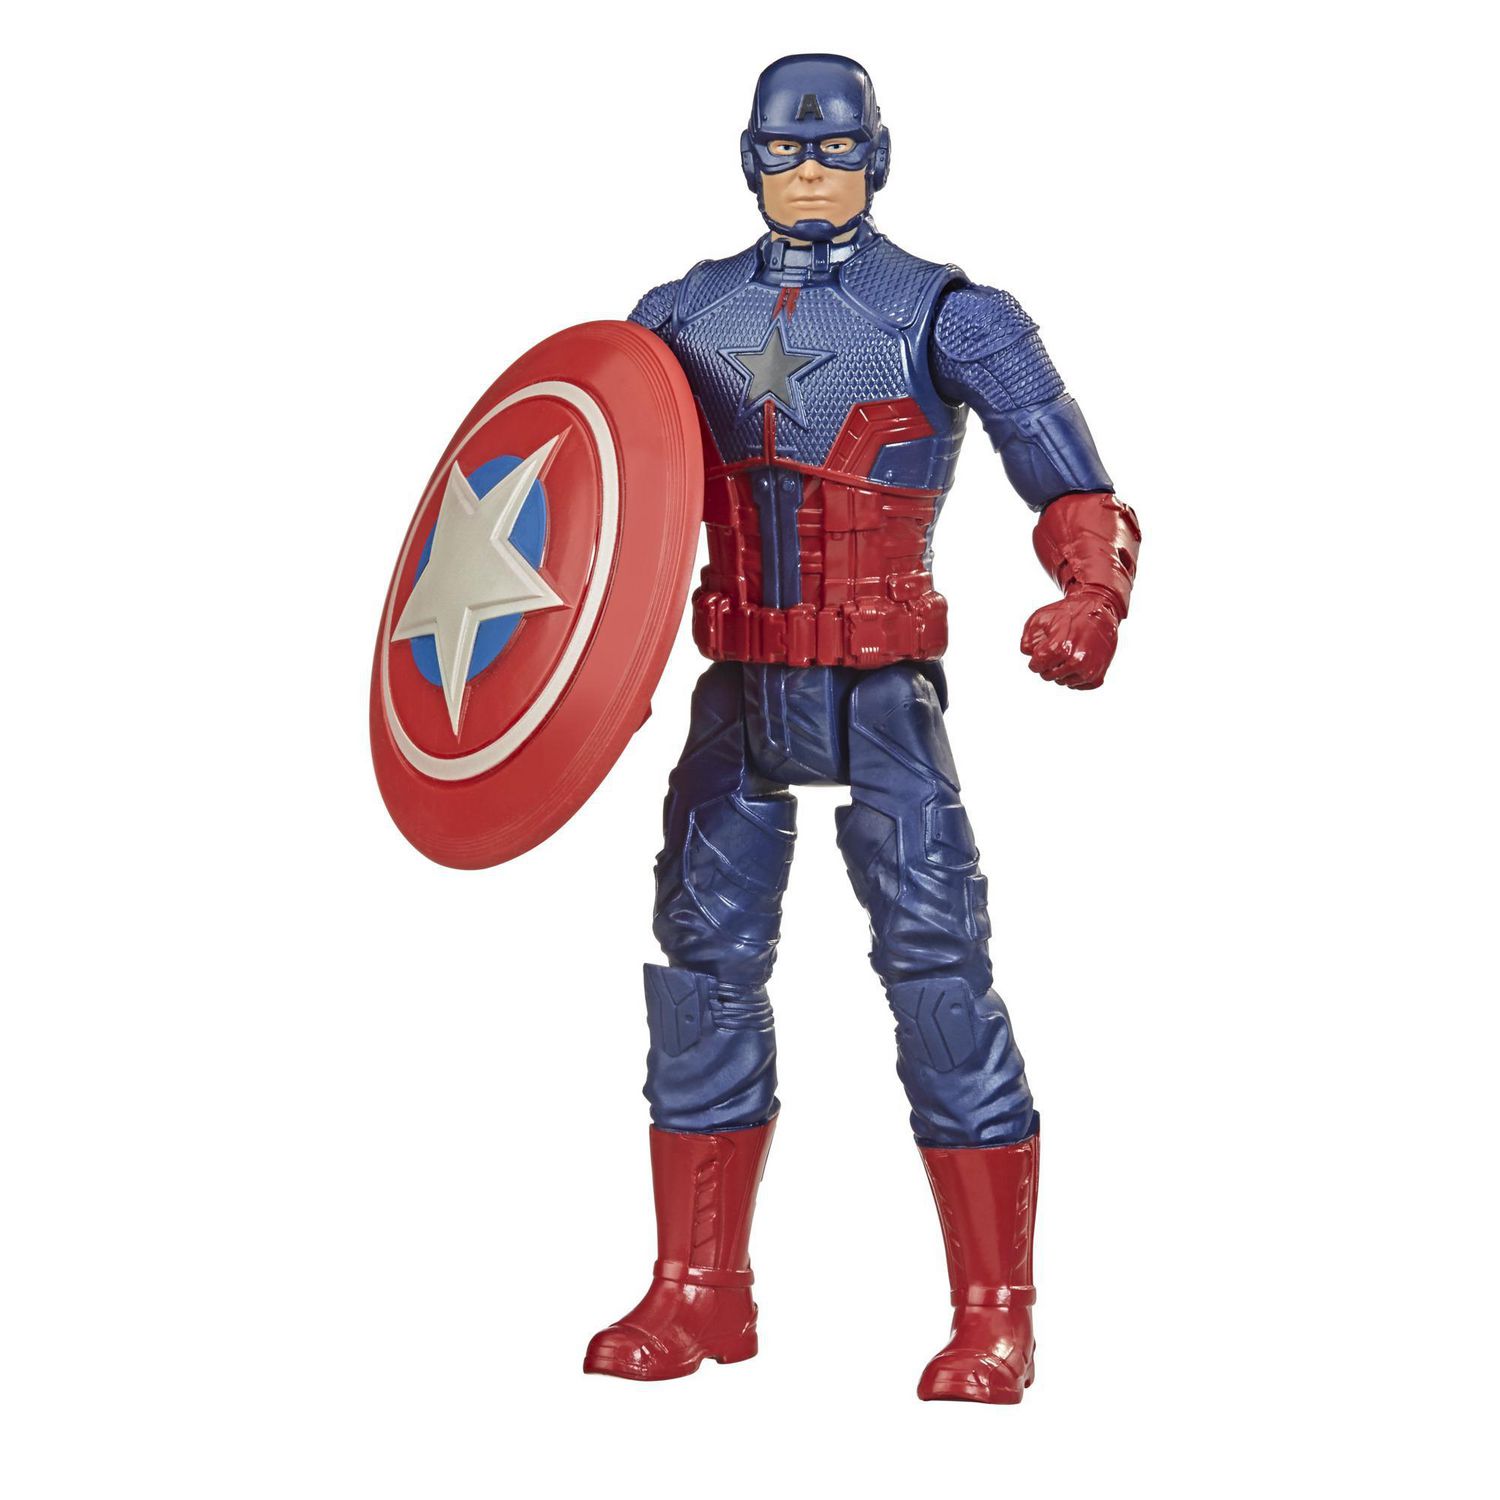 Hasbro Marvel Gamerverse 6-inch Action Figure Toy, Video Game